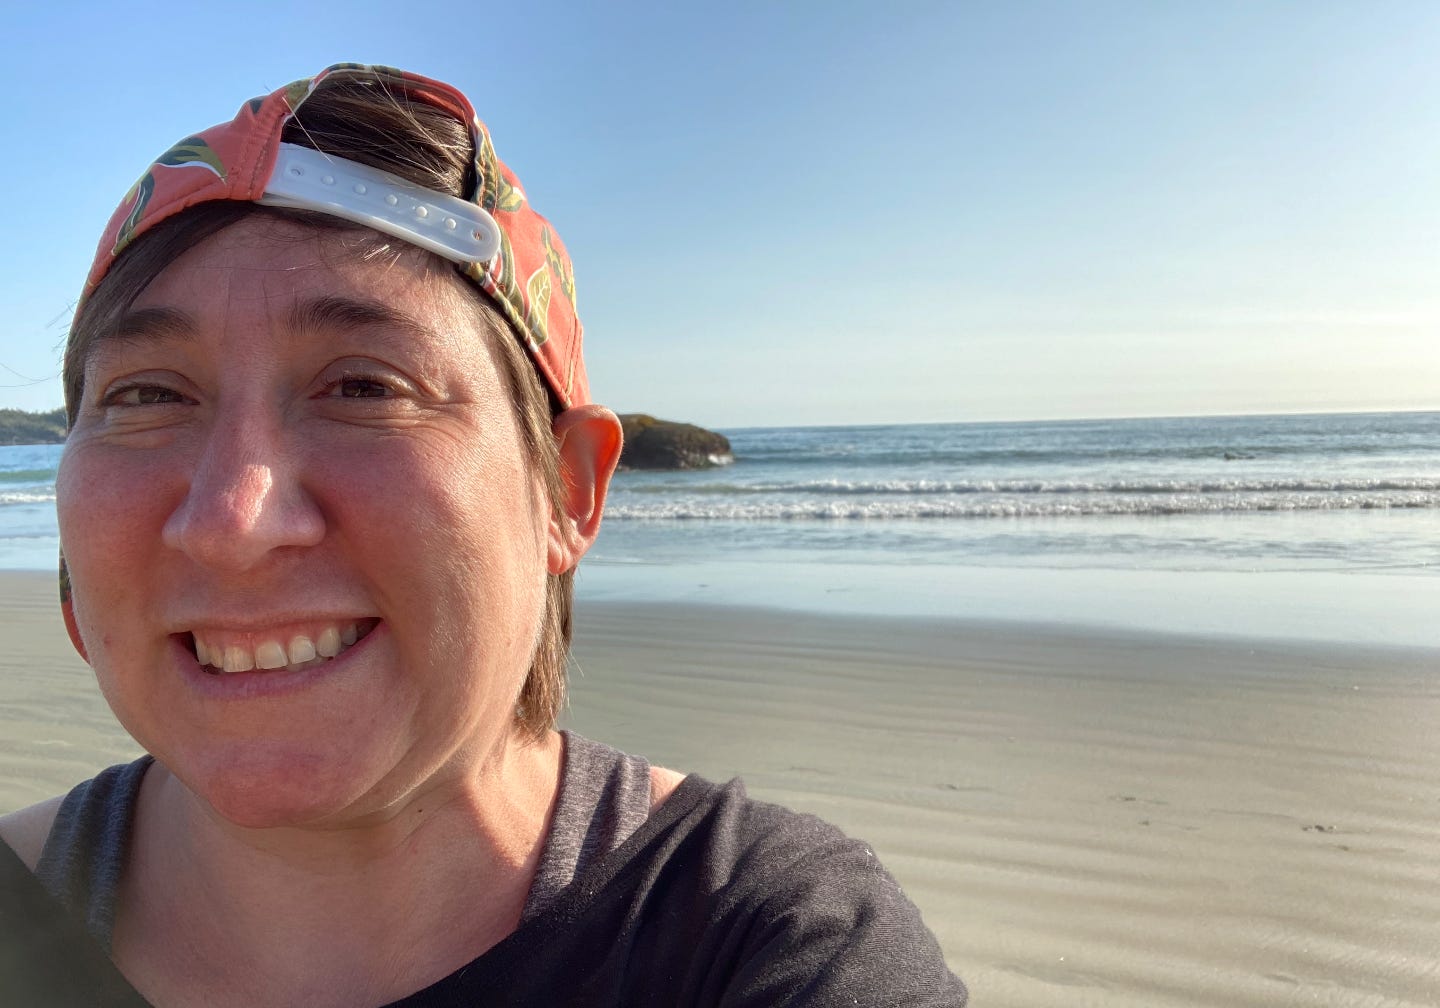 me, a white, sunburned person wearing a backwards hat with a bright print, grinning like a fool on a beach in tofino. 